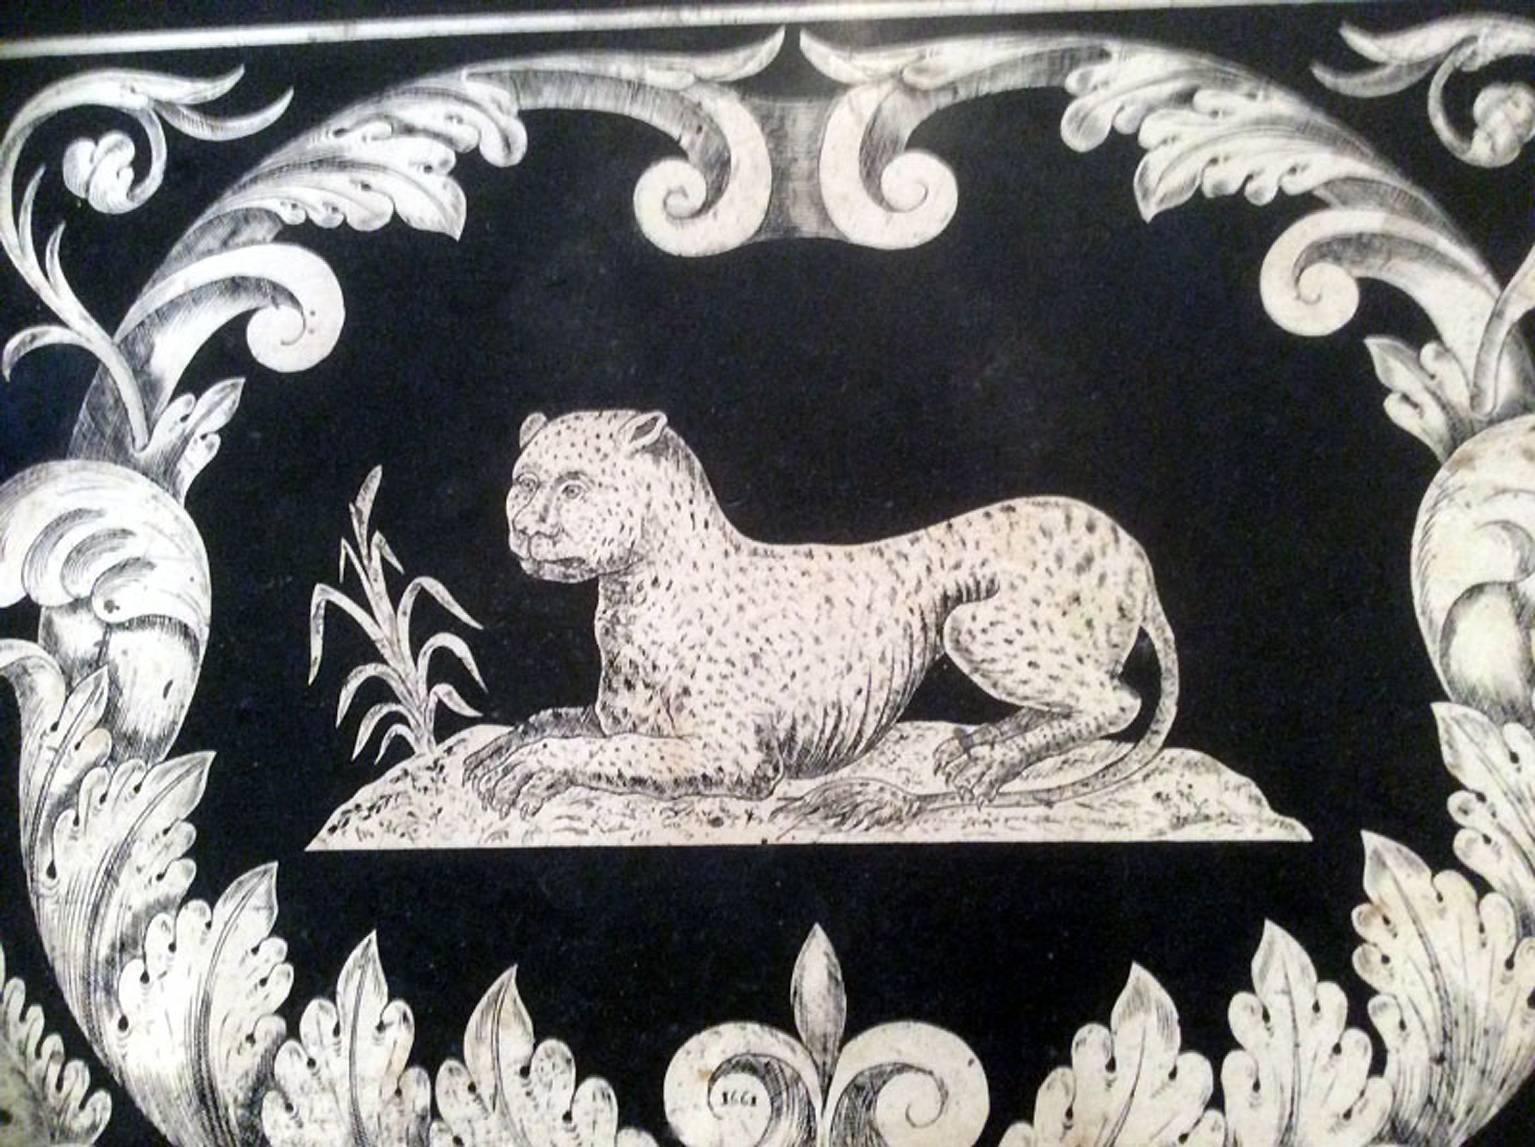 Rare Italian Scagliola table top in black and white, dated 1661 in the decor. Fine scene of a leopard, putti playing in vine branches, acanthus leaves, flowers and lilies. Can be used in table top or wall decoration, like a painting.